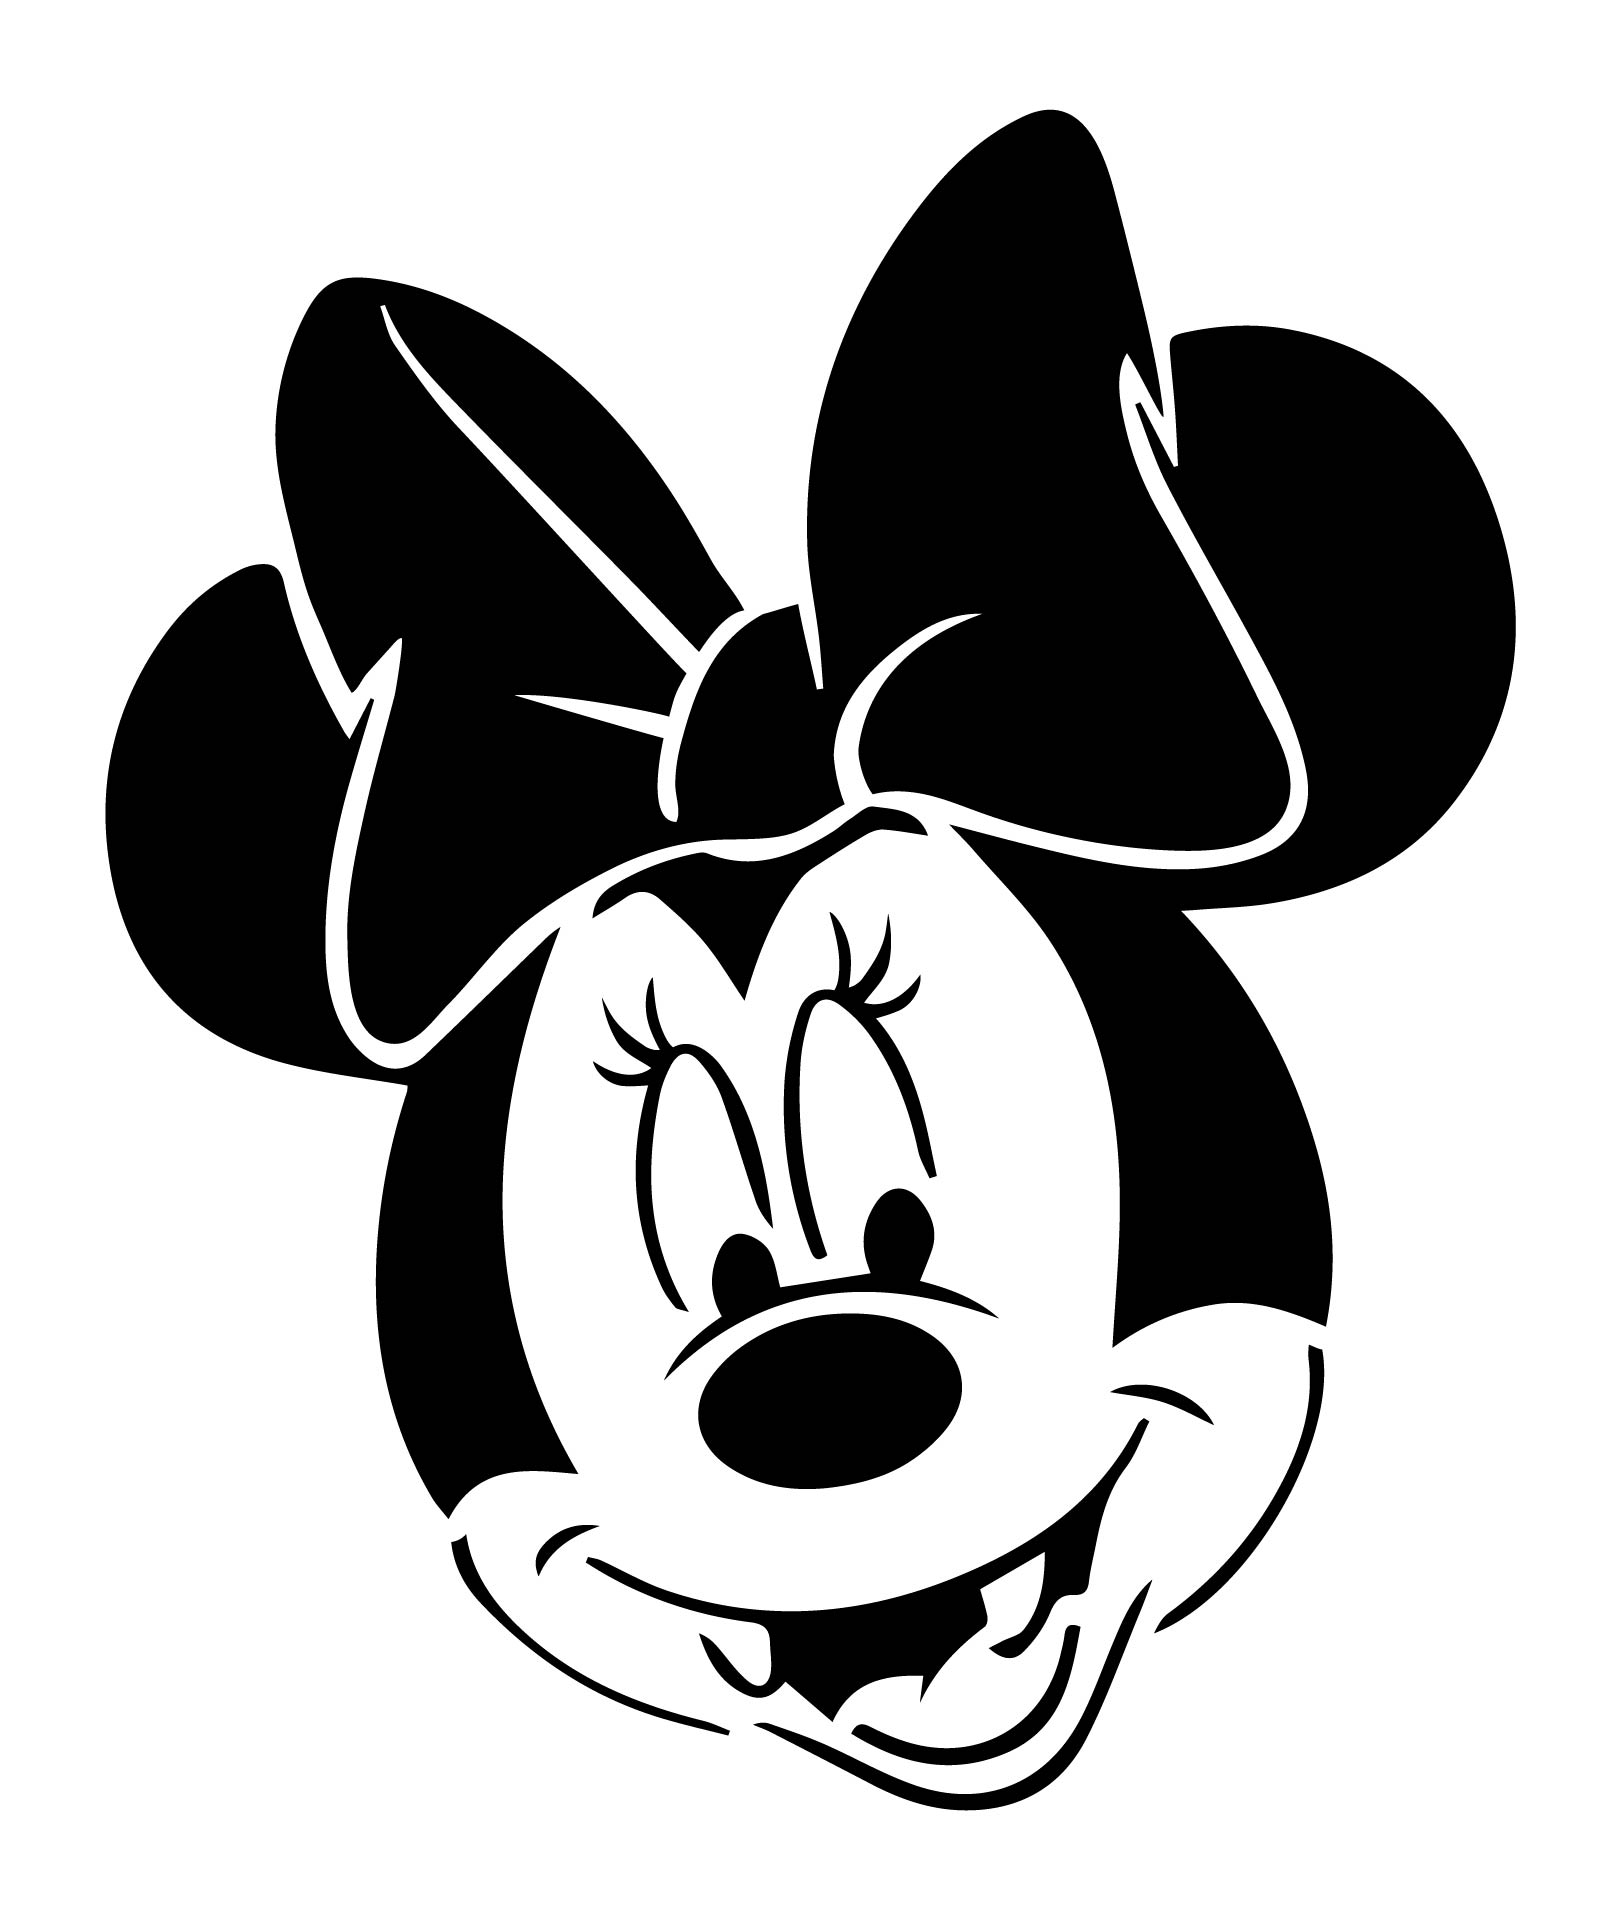 5-best-images-of-minnie-mouse-pumpkin-stencils-printable-free